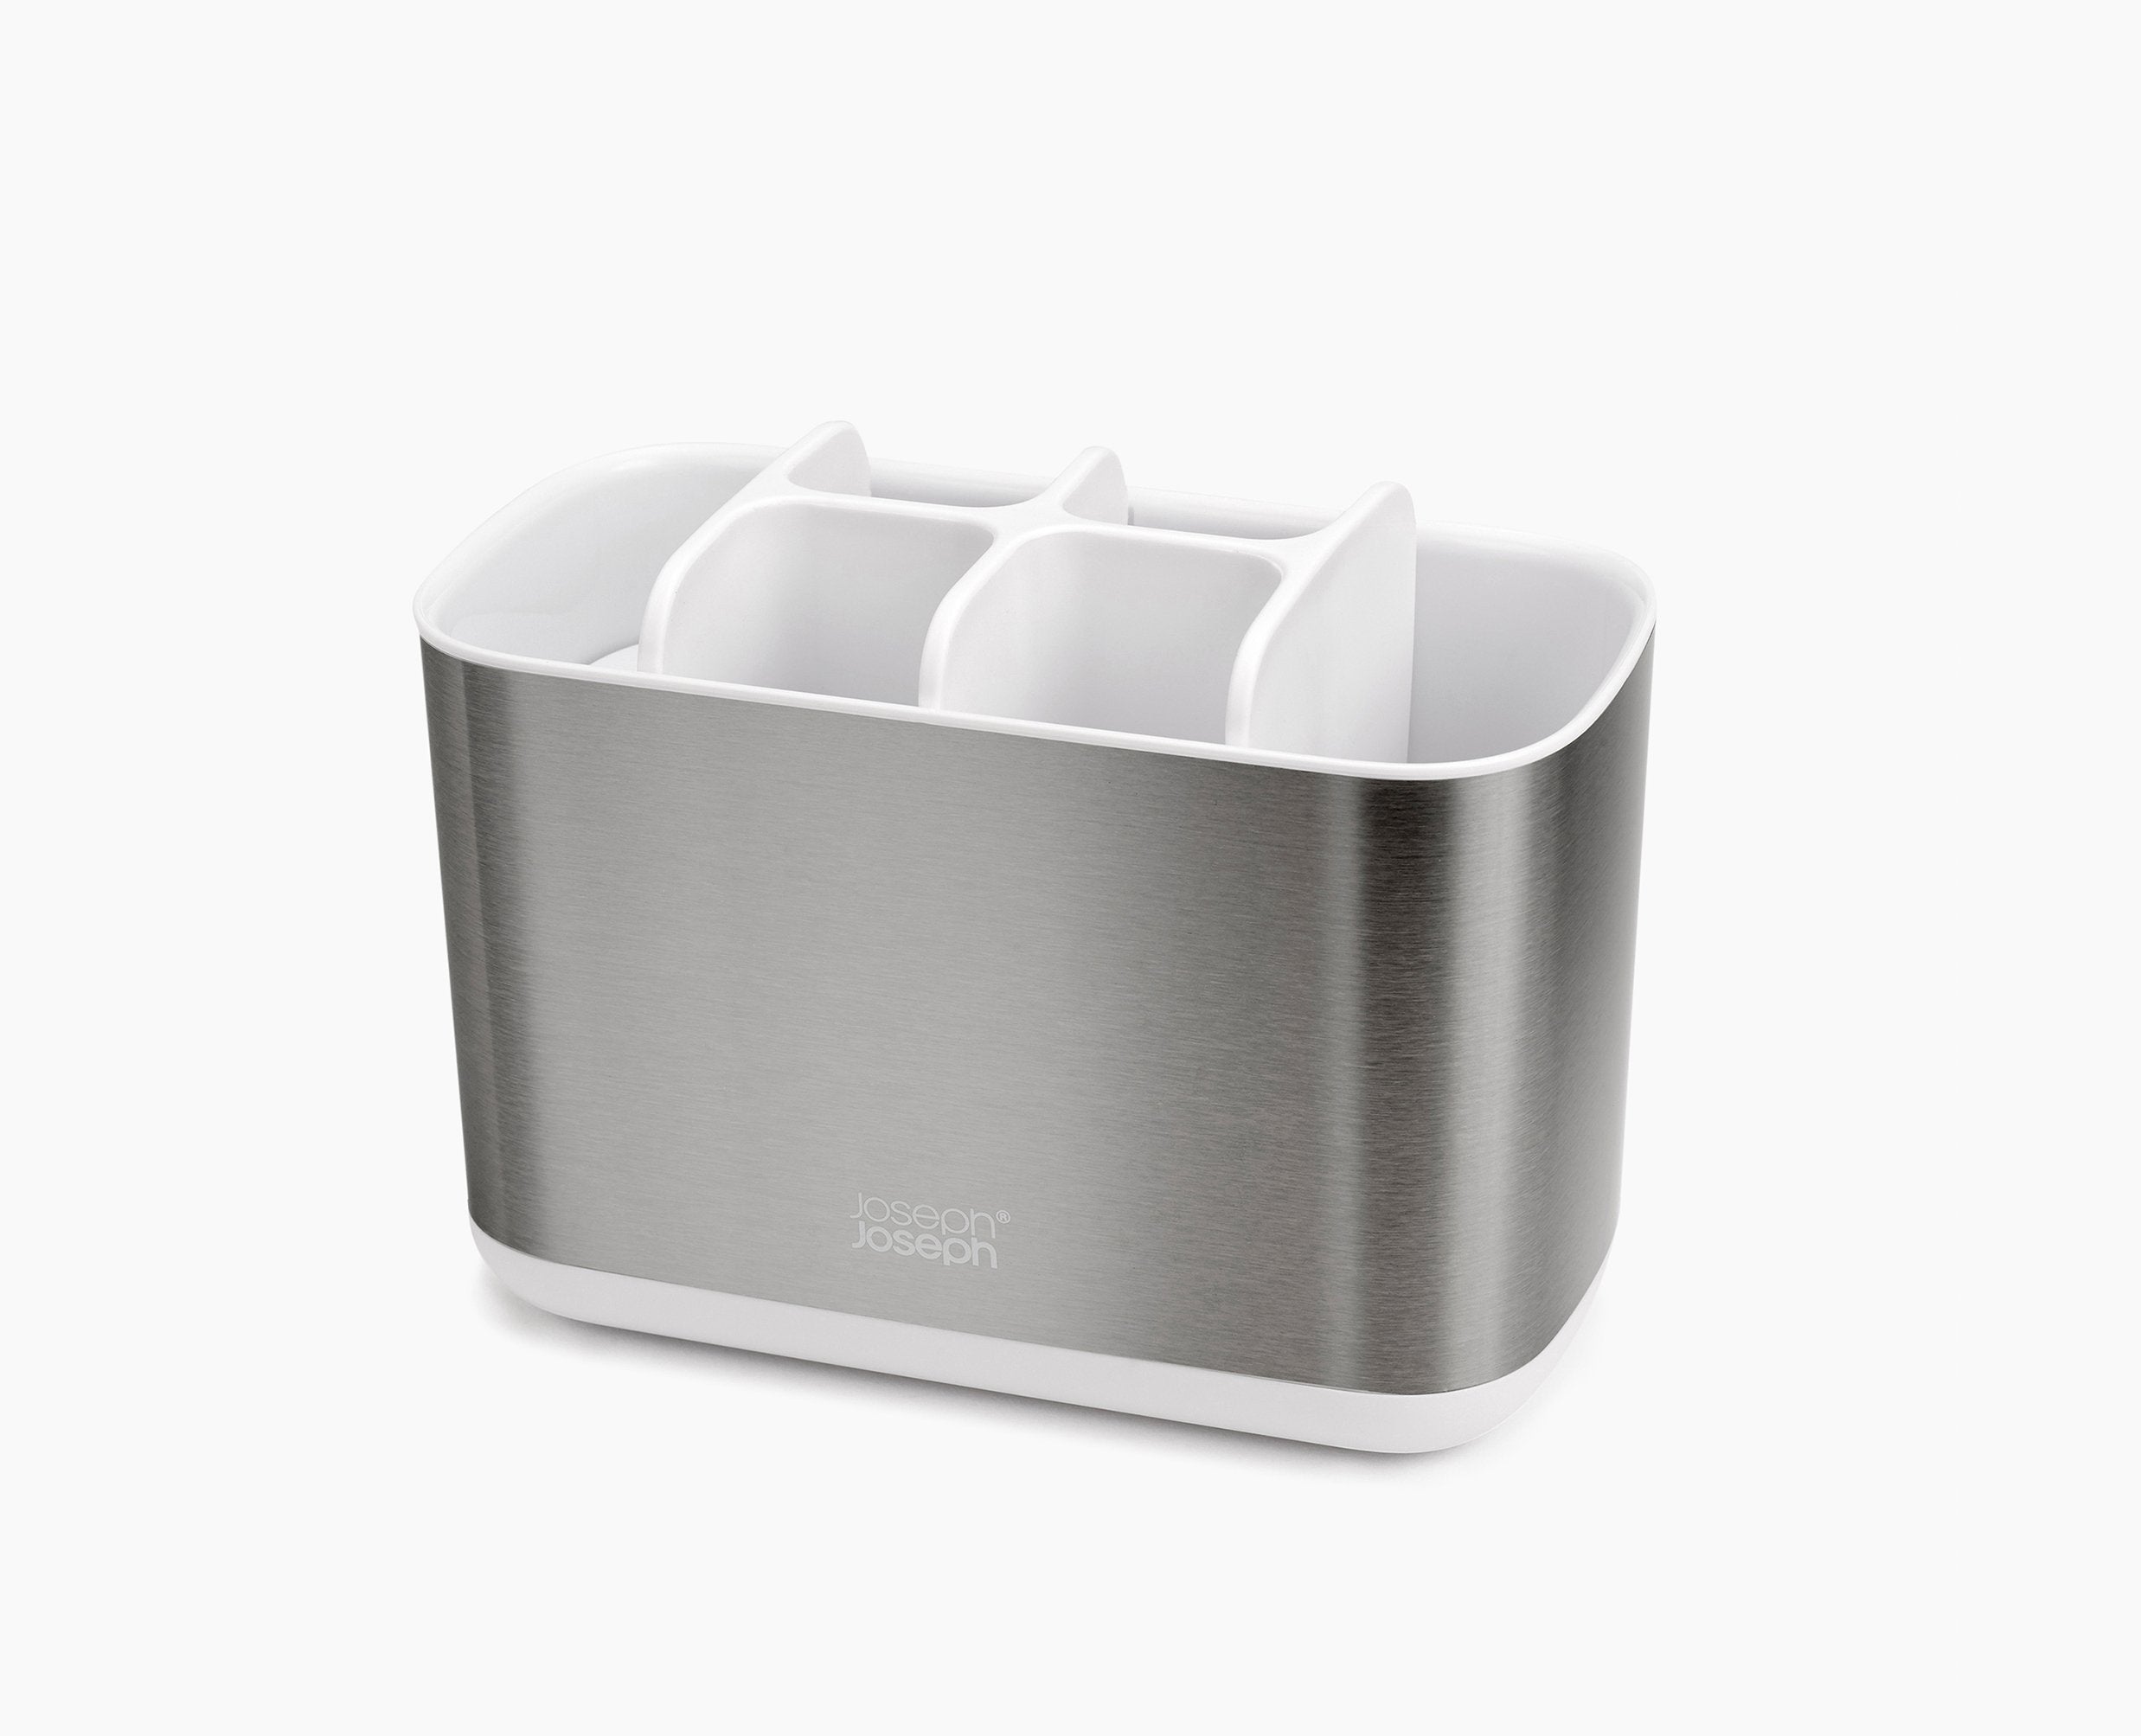 BEON.COM.AU  These compact toothbrush caddies are divided into different sections to provide organised storage for a variety of oral care items, such as manual or electric toothbrushes and toothpaste tubes.  Suitable for storing electric or battery toothbrushes and toothpaste tubes Stainless-steel finish wit... Joseph Joseph at BEON.COM.AU